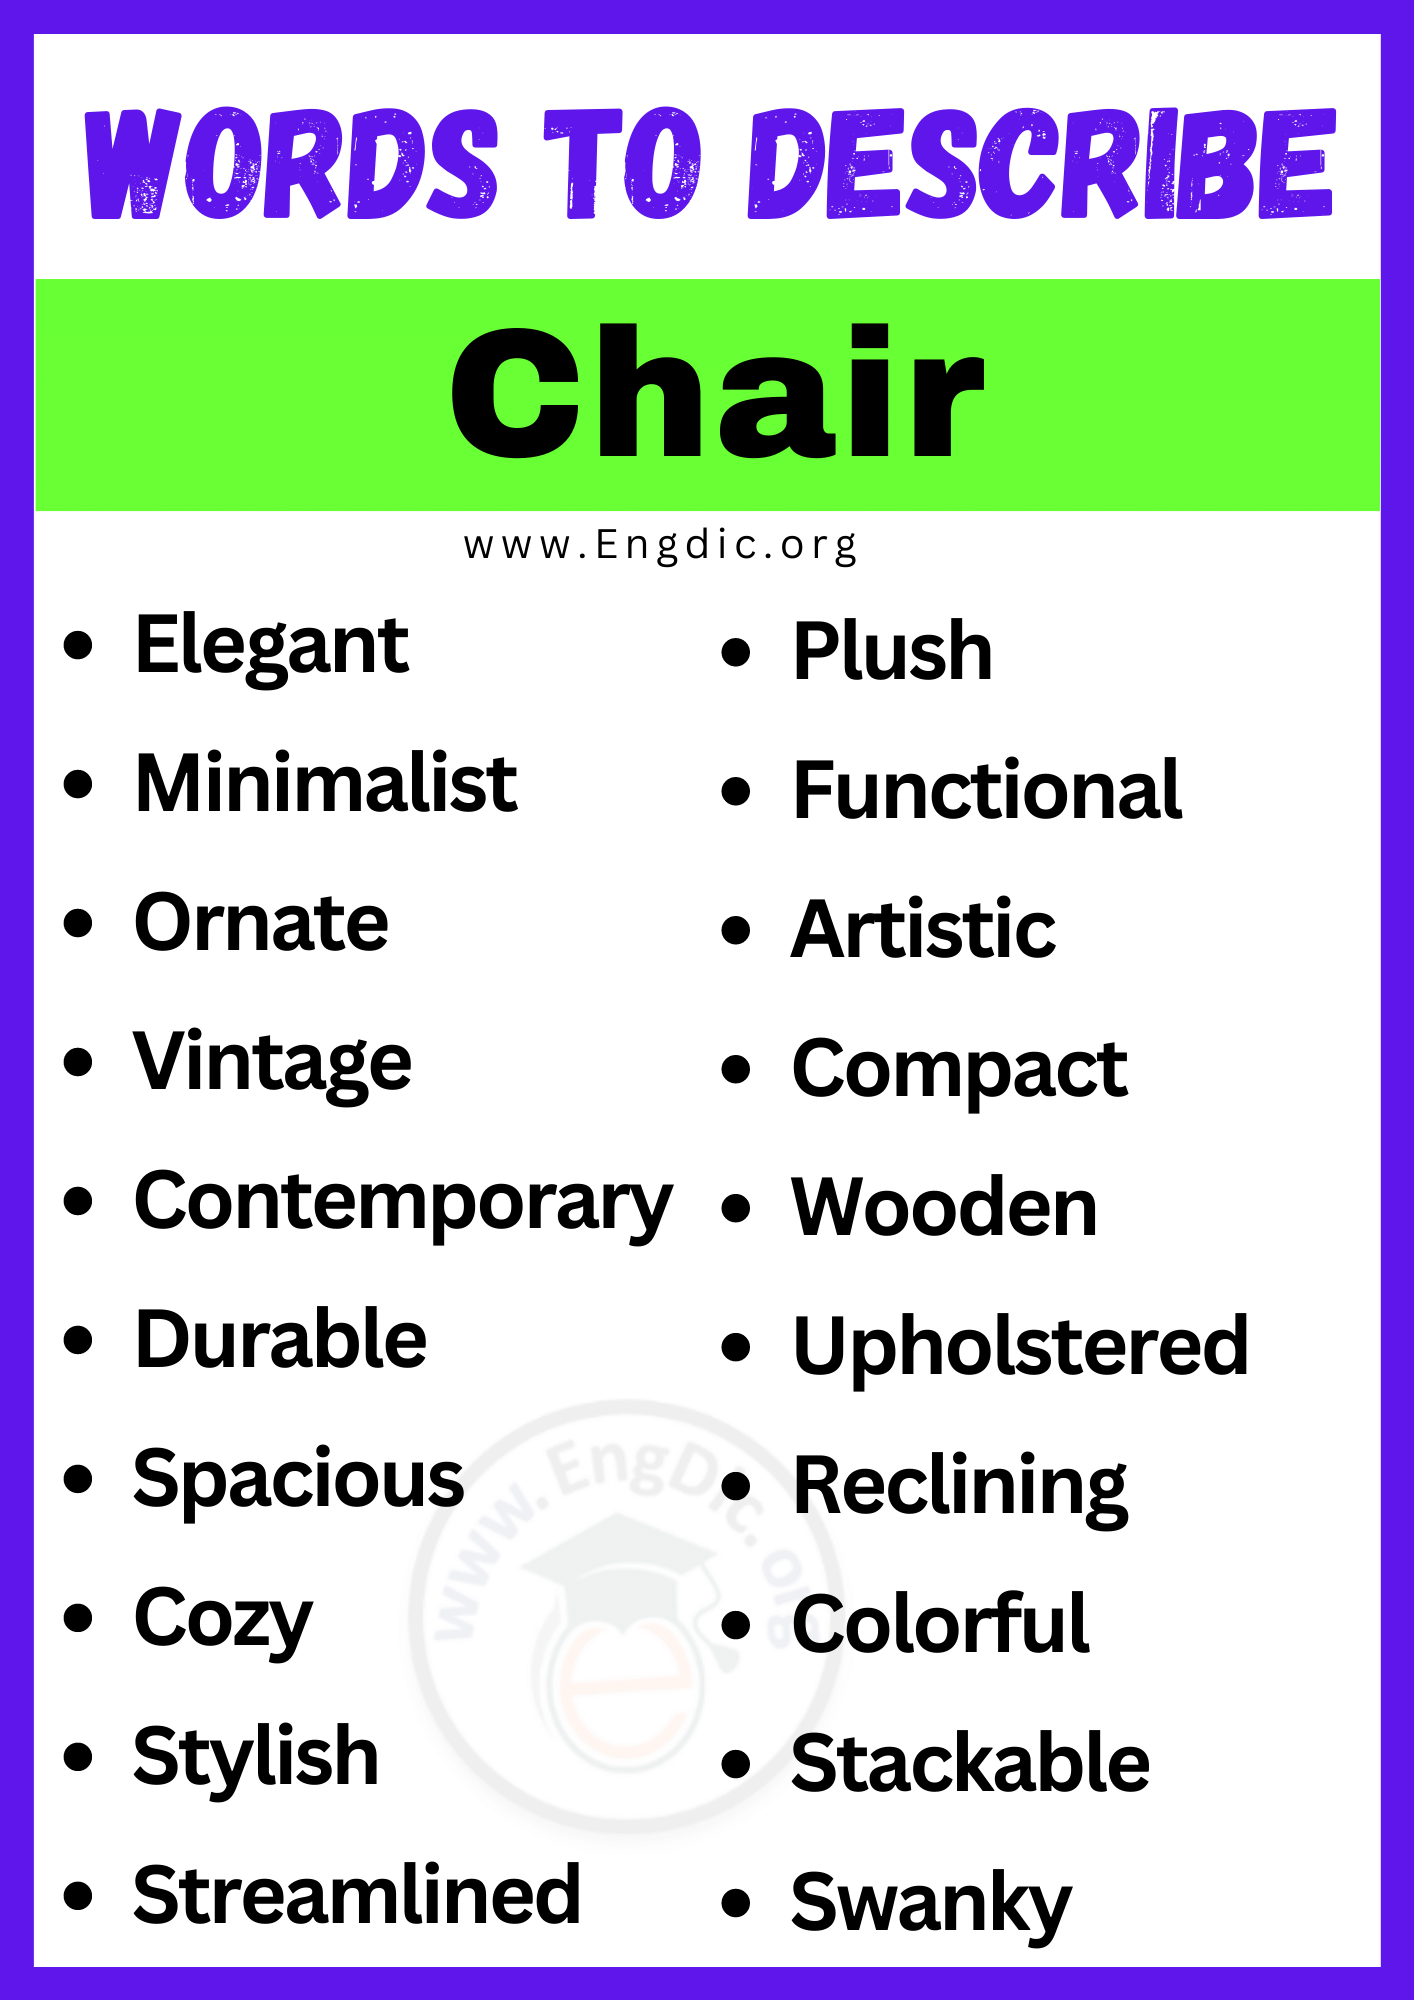 Words to Describe Chair